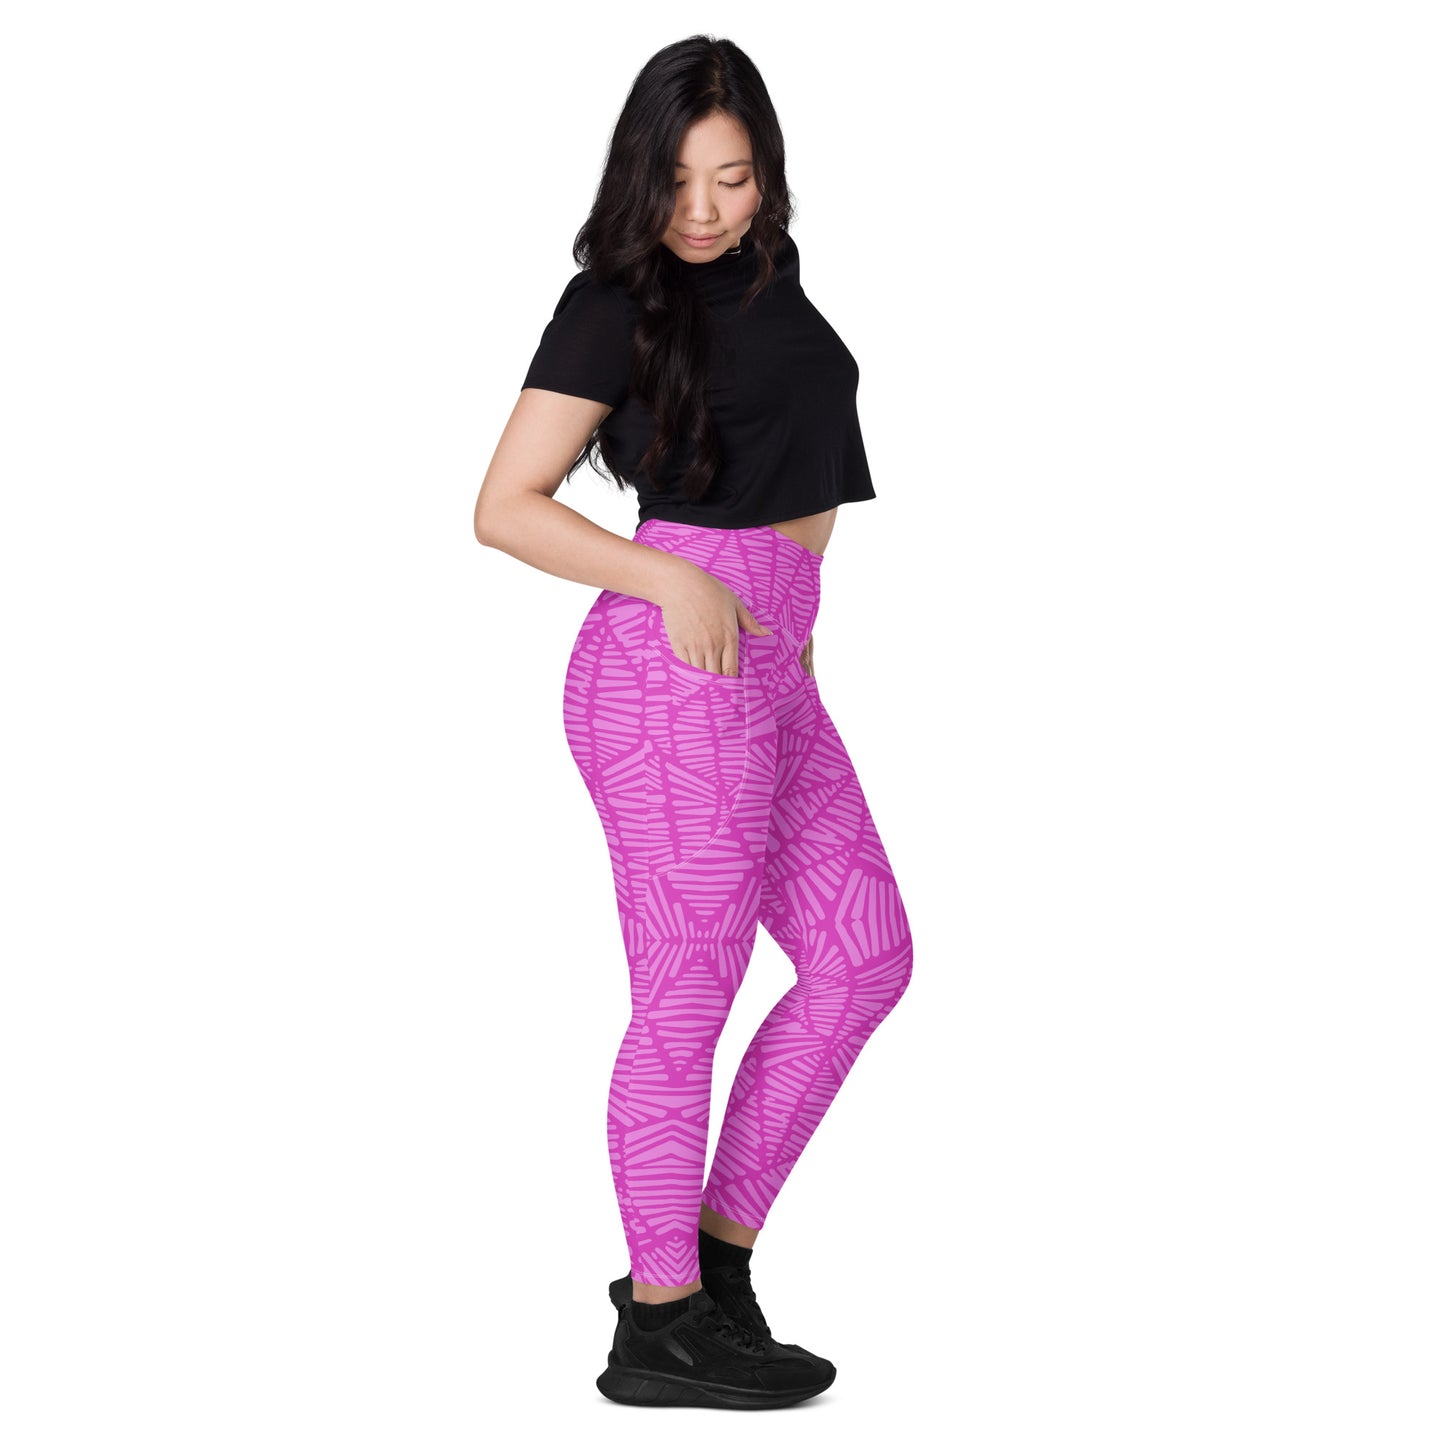 Orchid Zebra Leggings with pockets